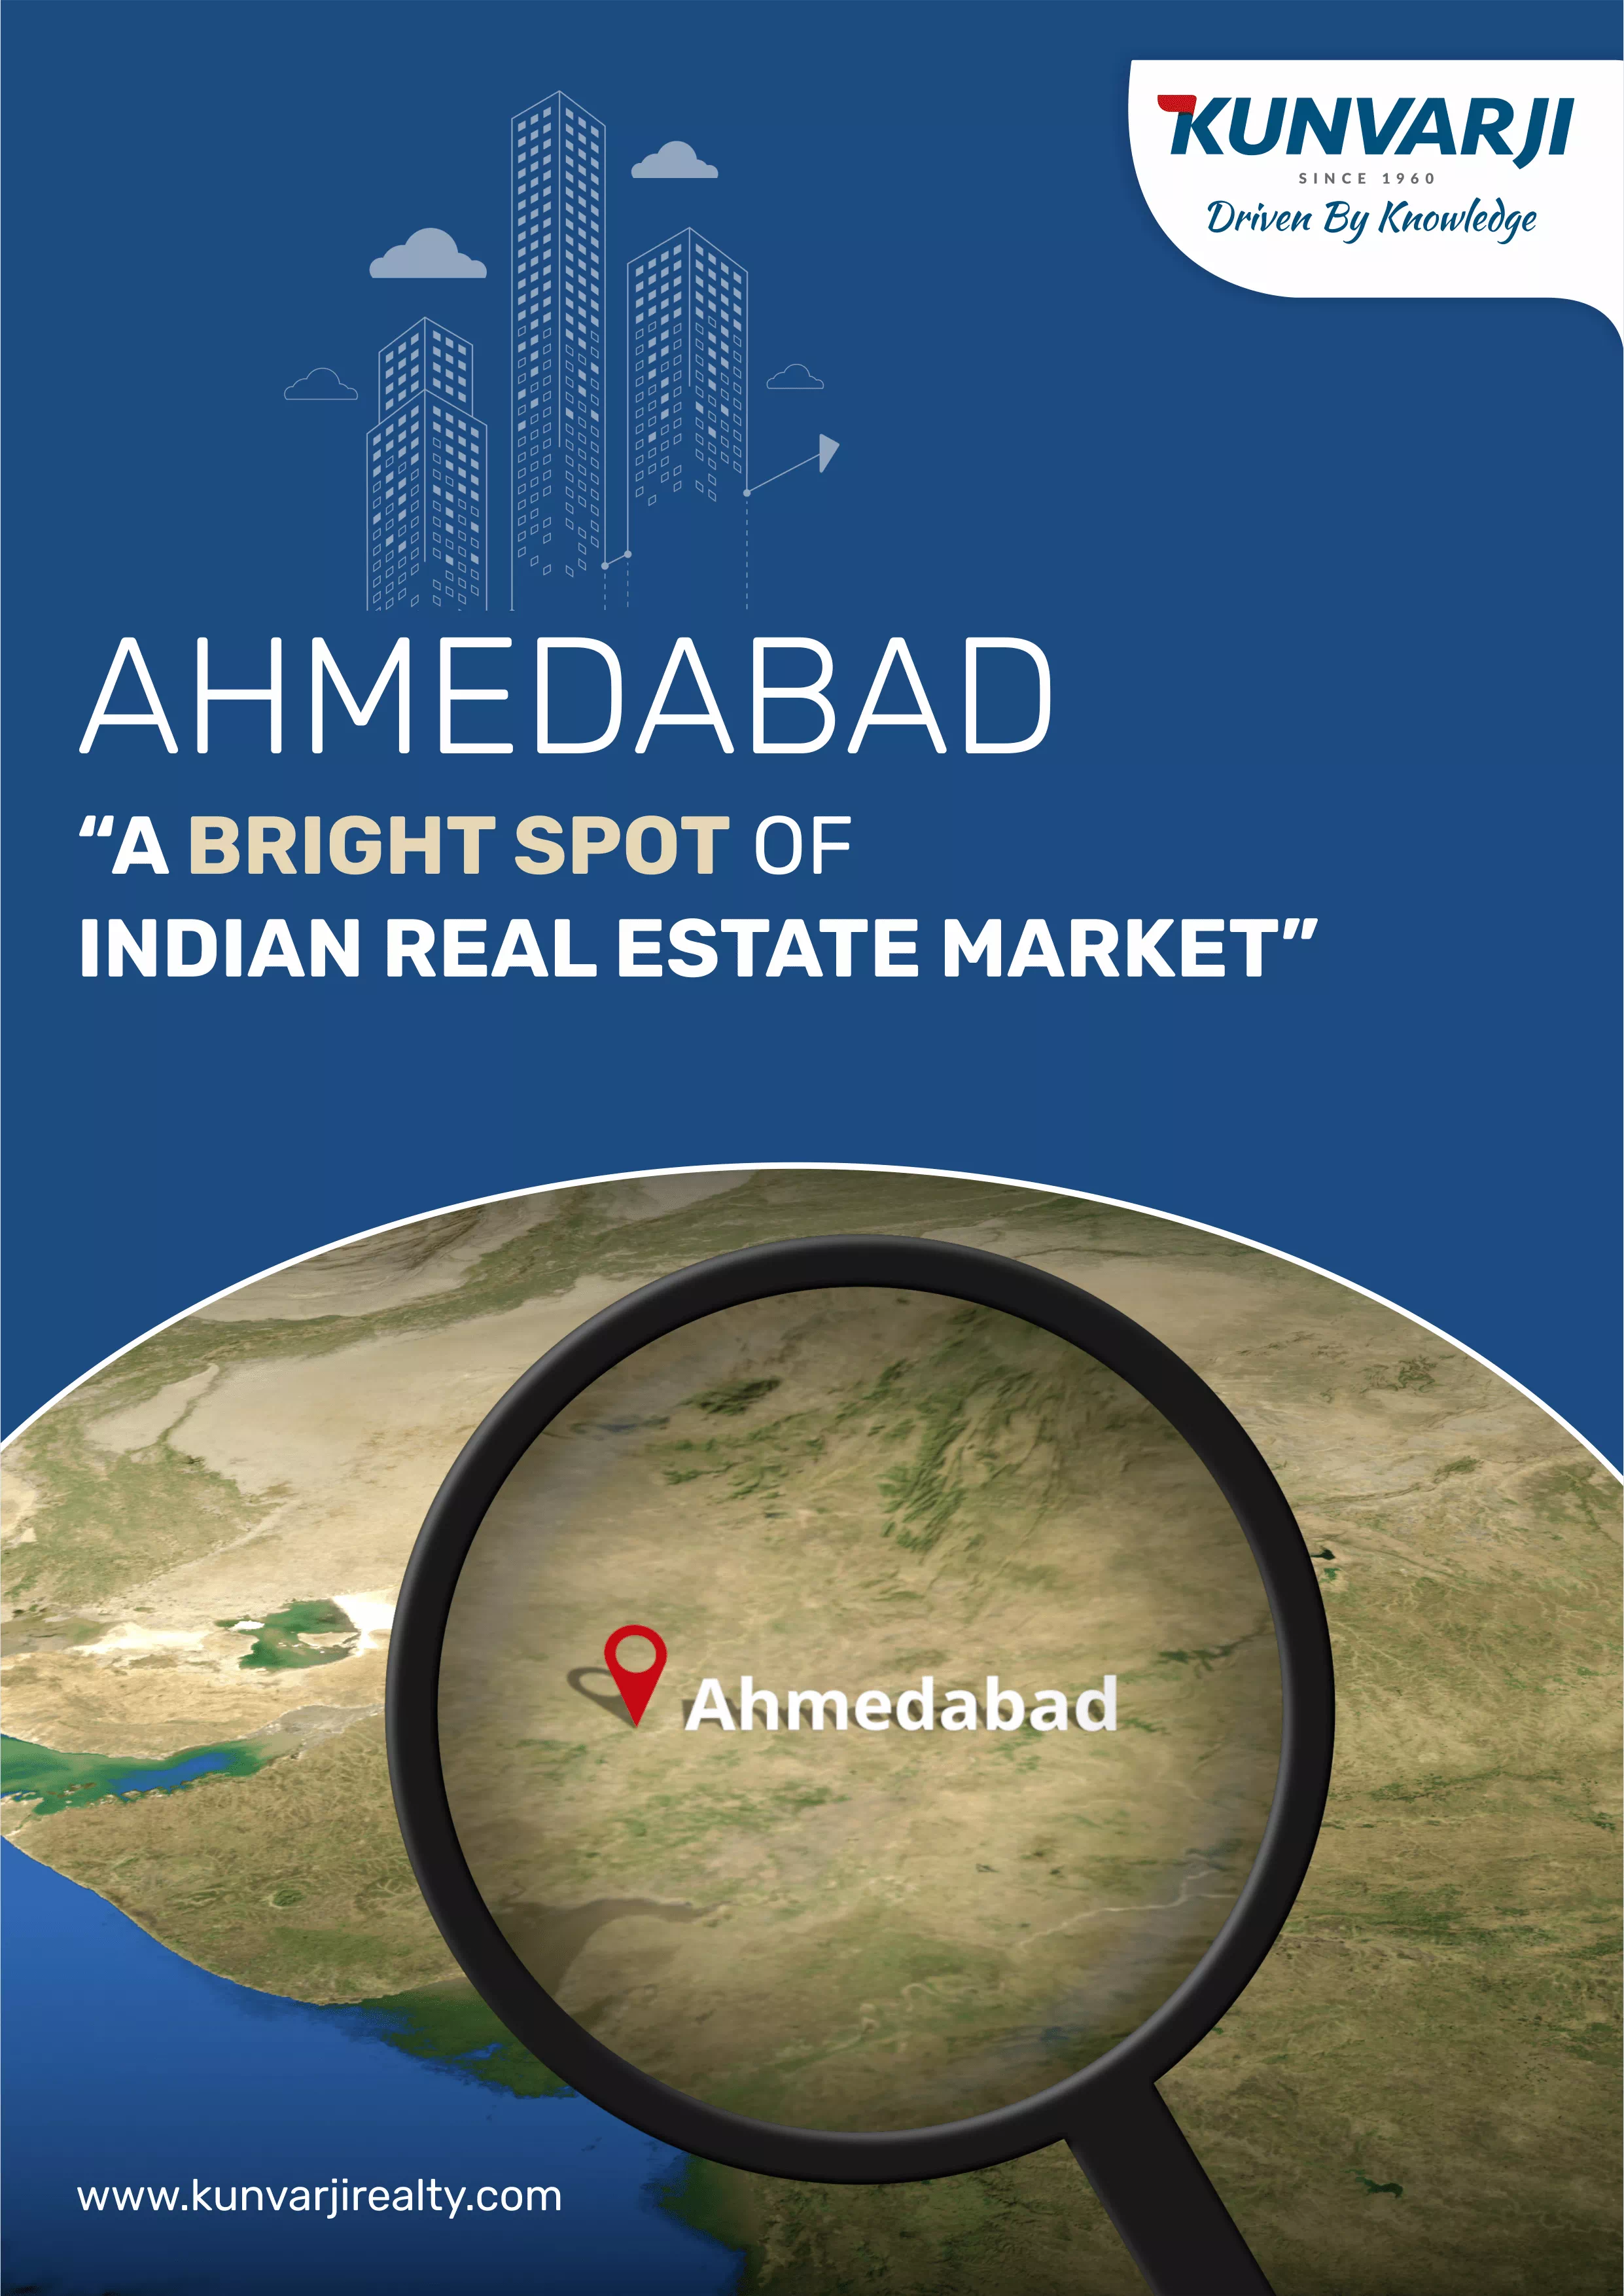 Ahmedabad a Bright Spot of Indian Real Estate Markets